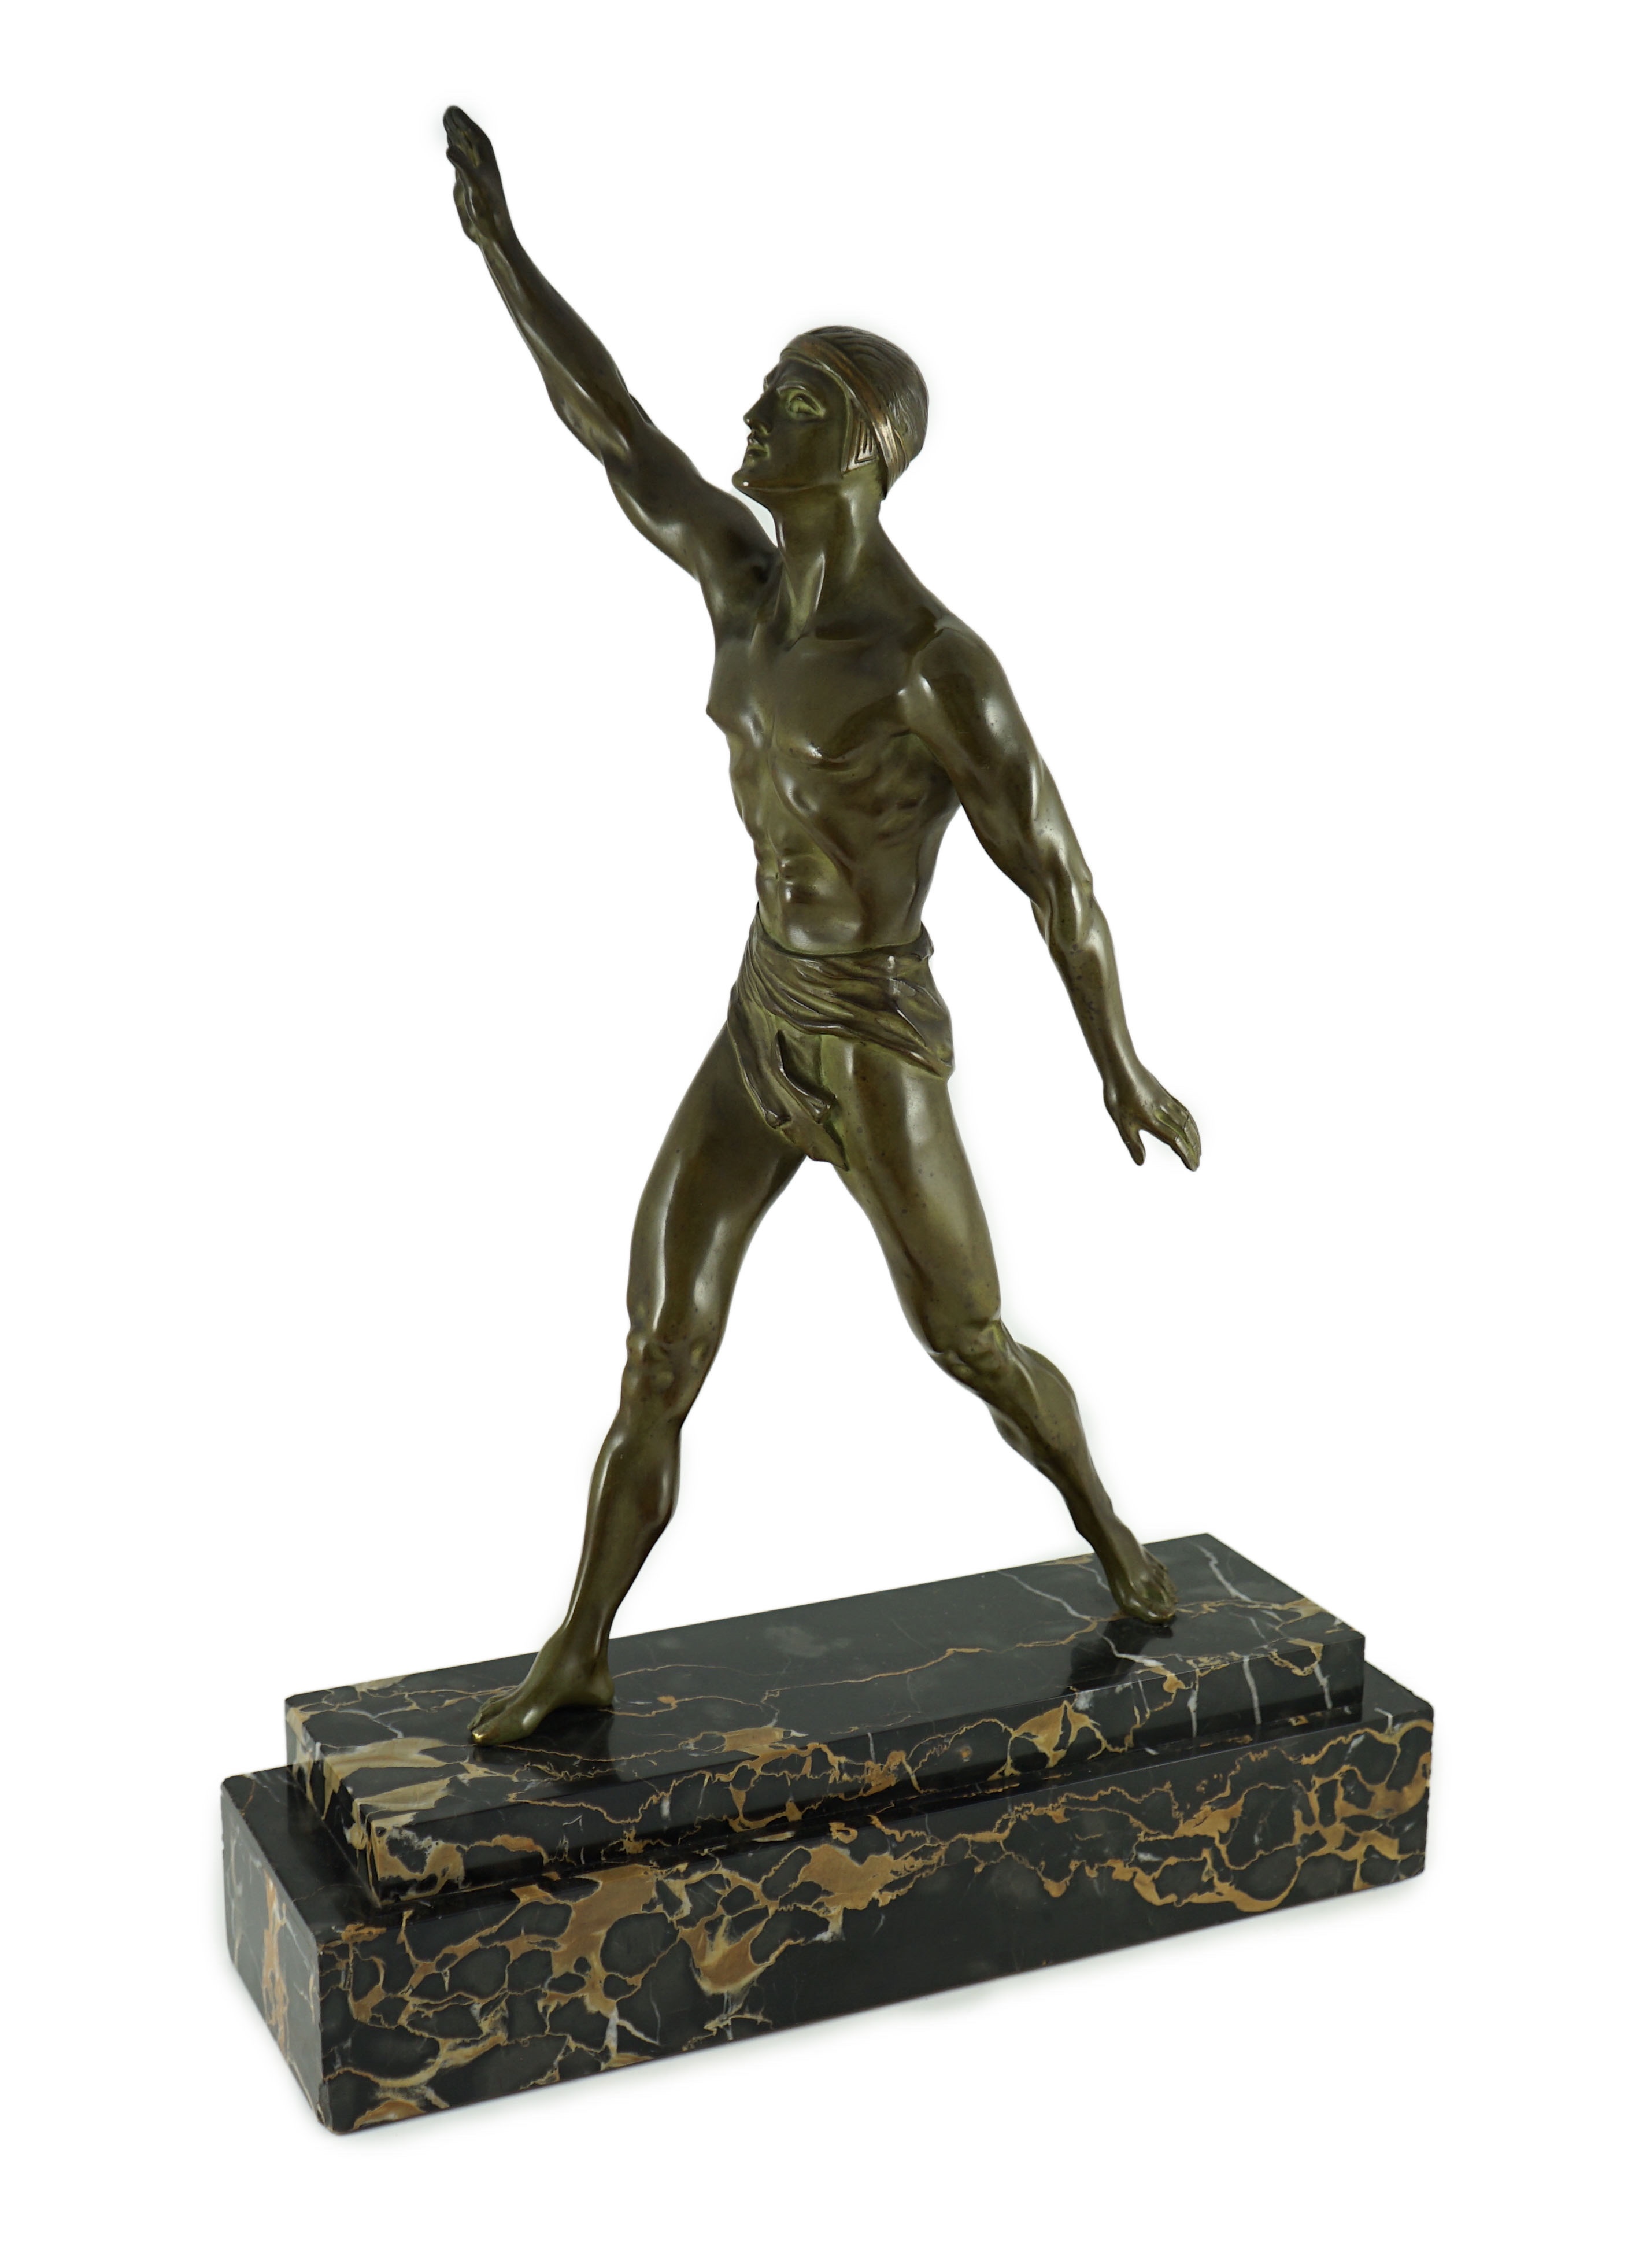 Editions Reverolis of Paris. A 1930's French Art Deco bronze figure of a classical athlete standing with raised arm, width 51cm, depth 15cm, height 76cm